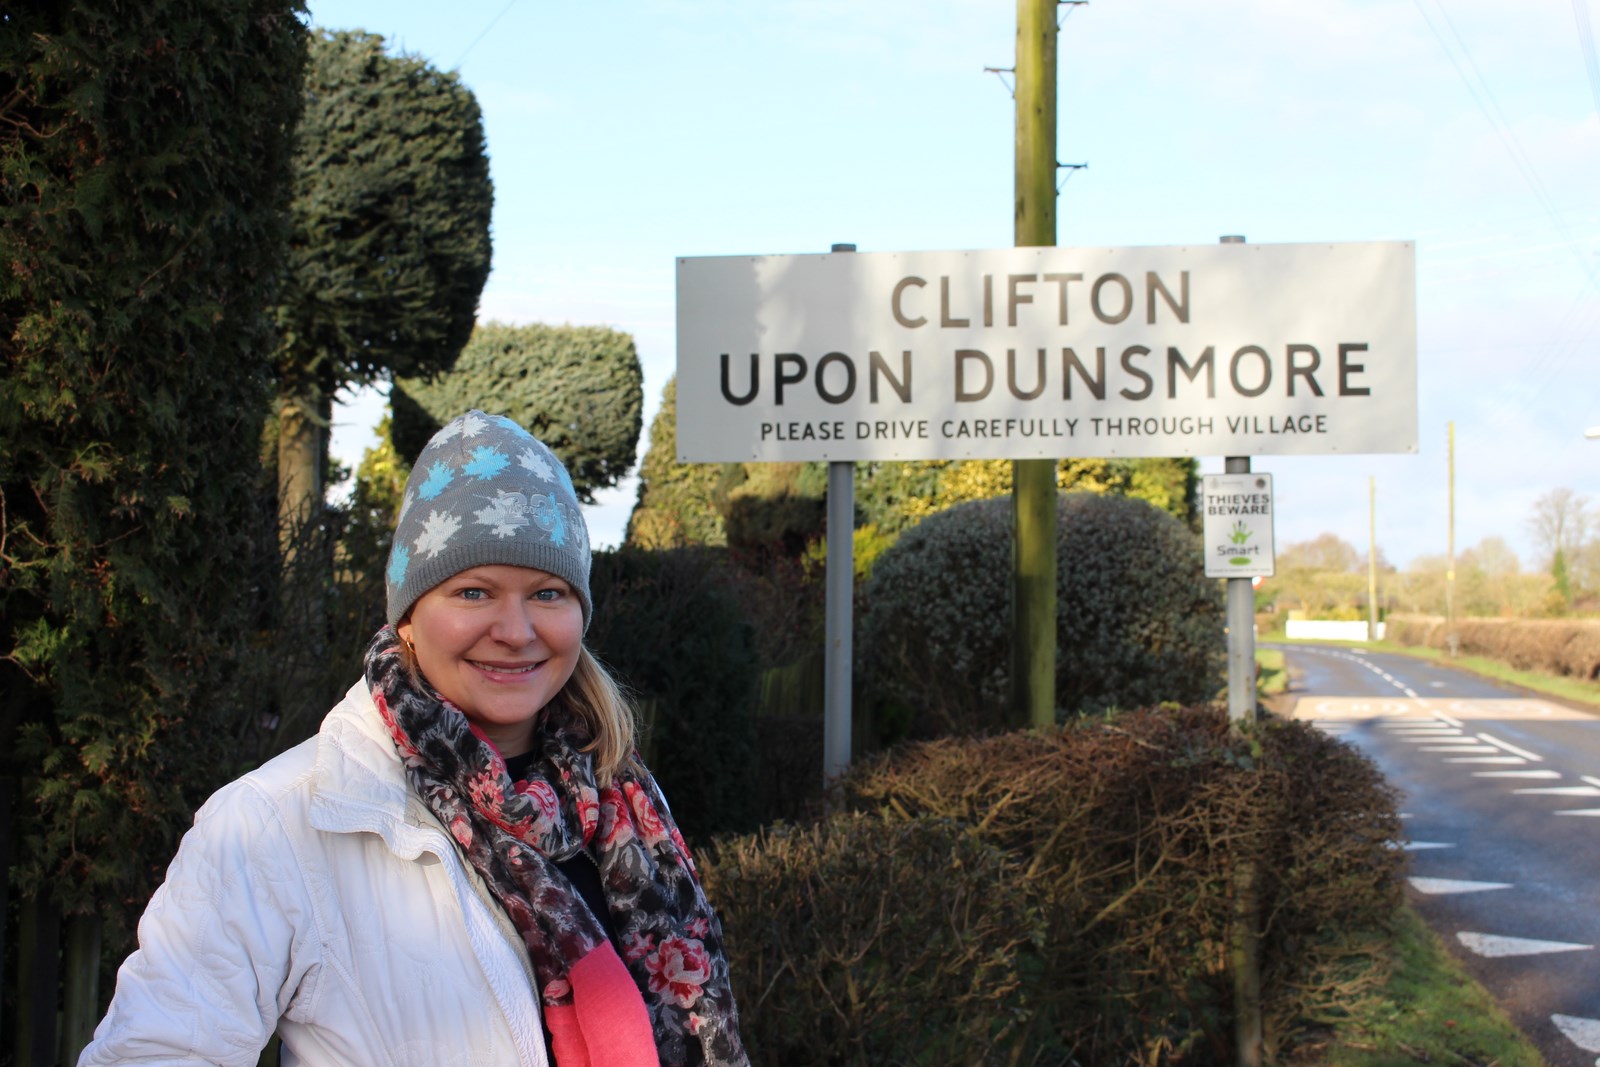 Days out in Warwickshire - Clifton upon Dunsmore